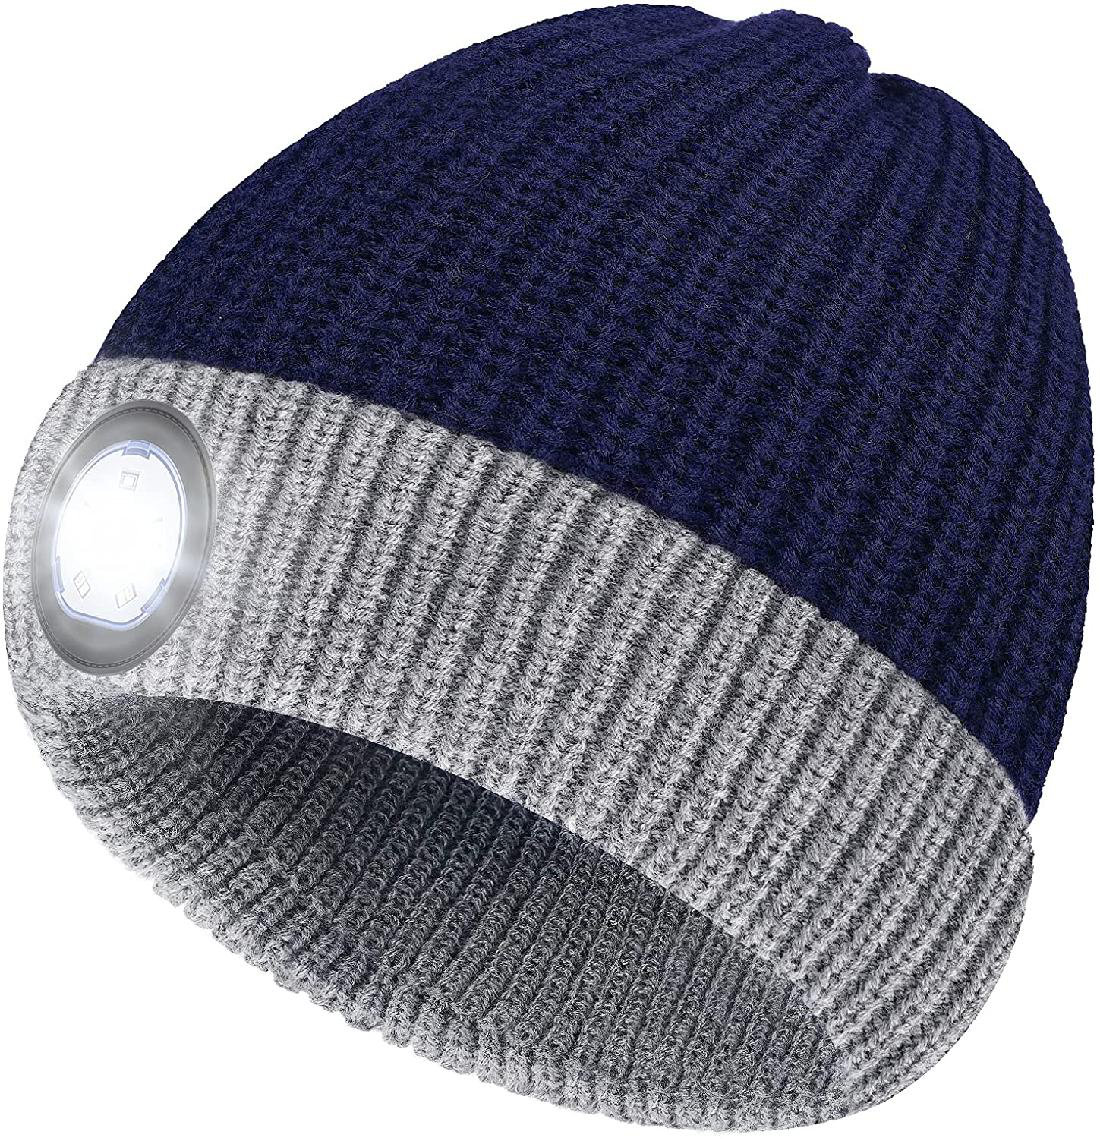 Camping at Night Biking Winter Warm Knitted Flashlight Hat Outdoor Sports LED Hat Light Headlamp Flashlight for Hiking Presents for Boys Girls LED Lighted Beanie Hat for Kids Fishing Camping